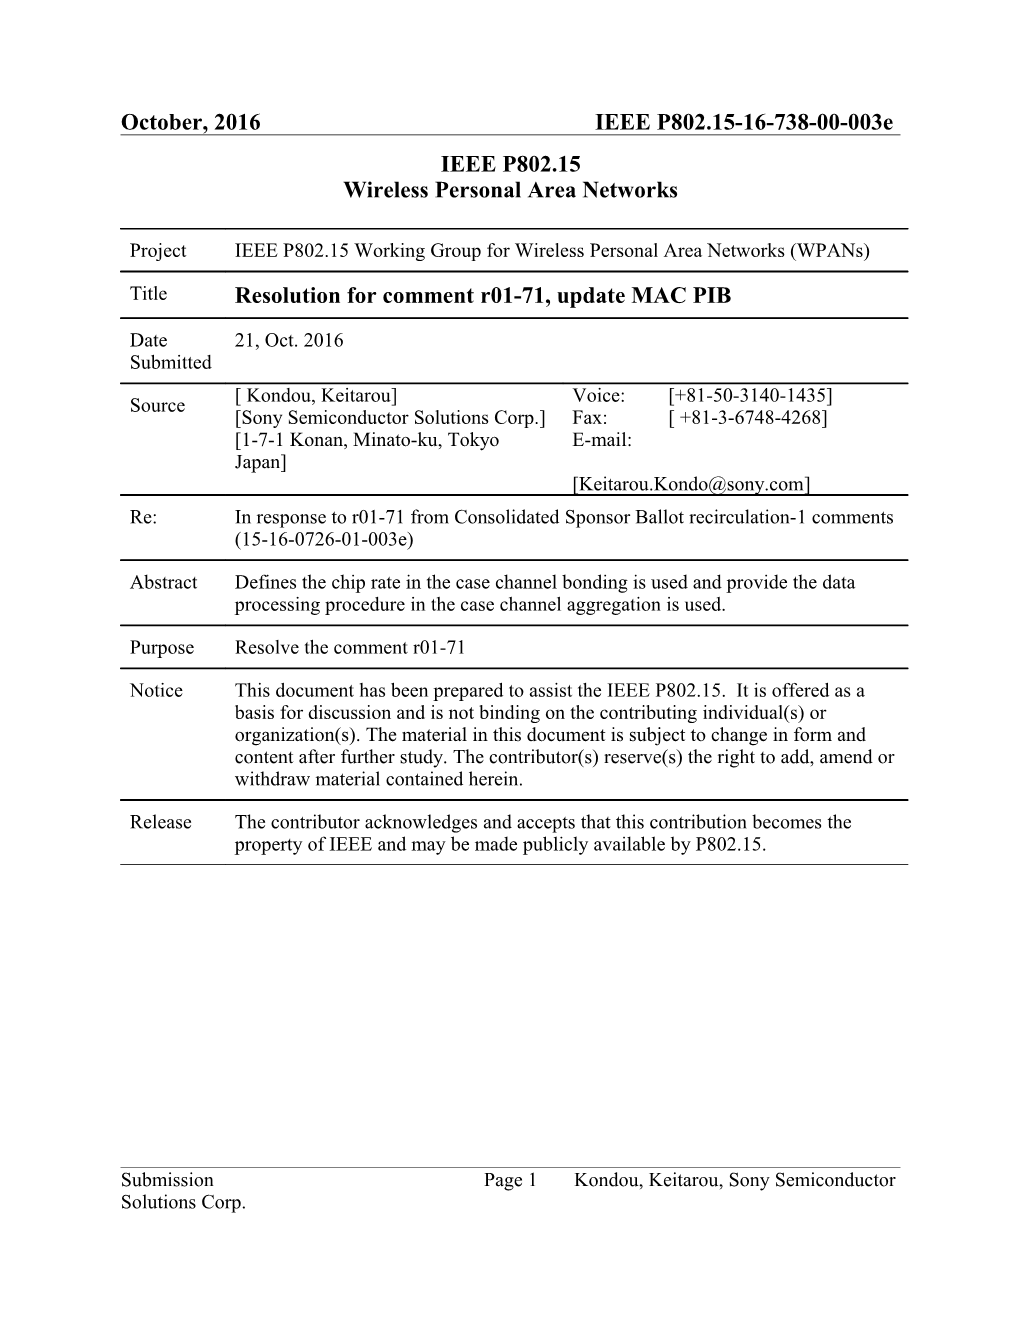 Resolution for Comment R01-71, Update MAC PIB